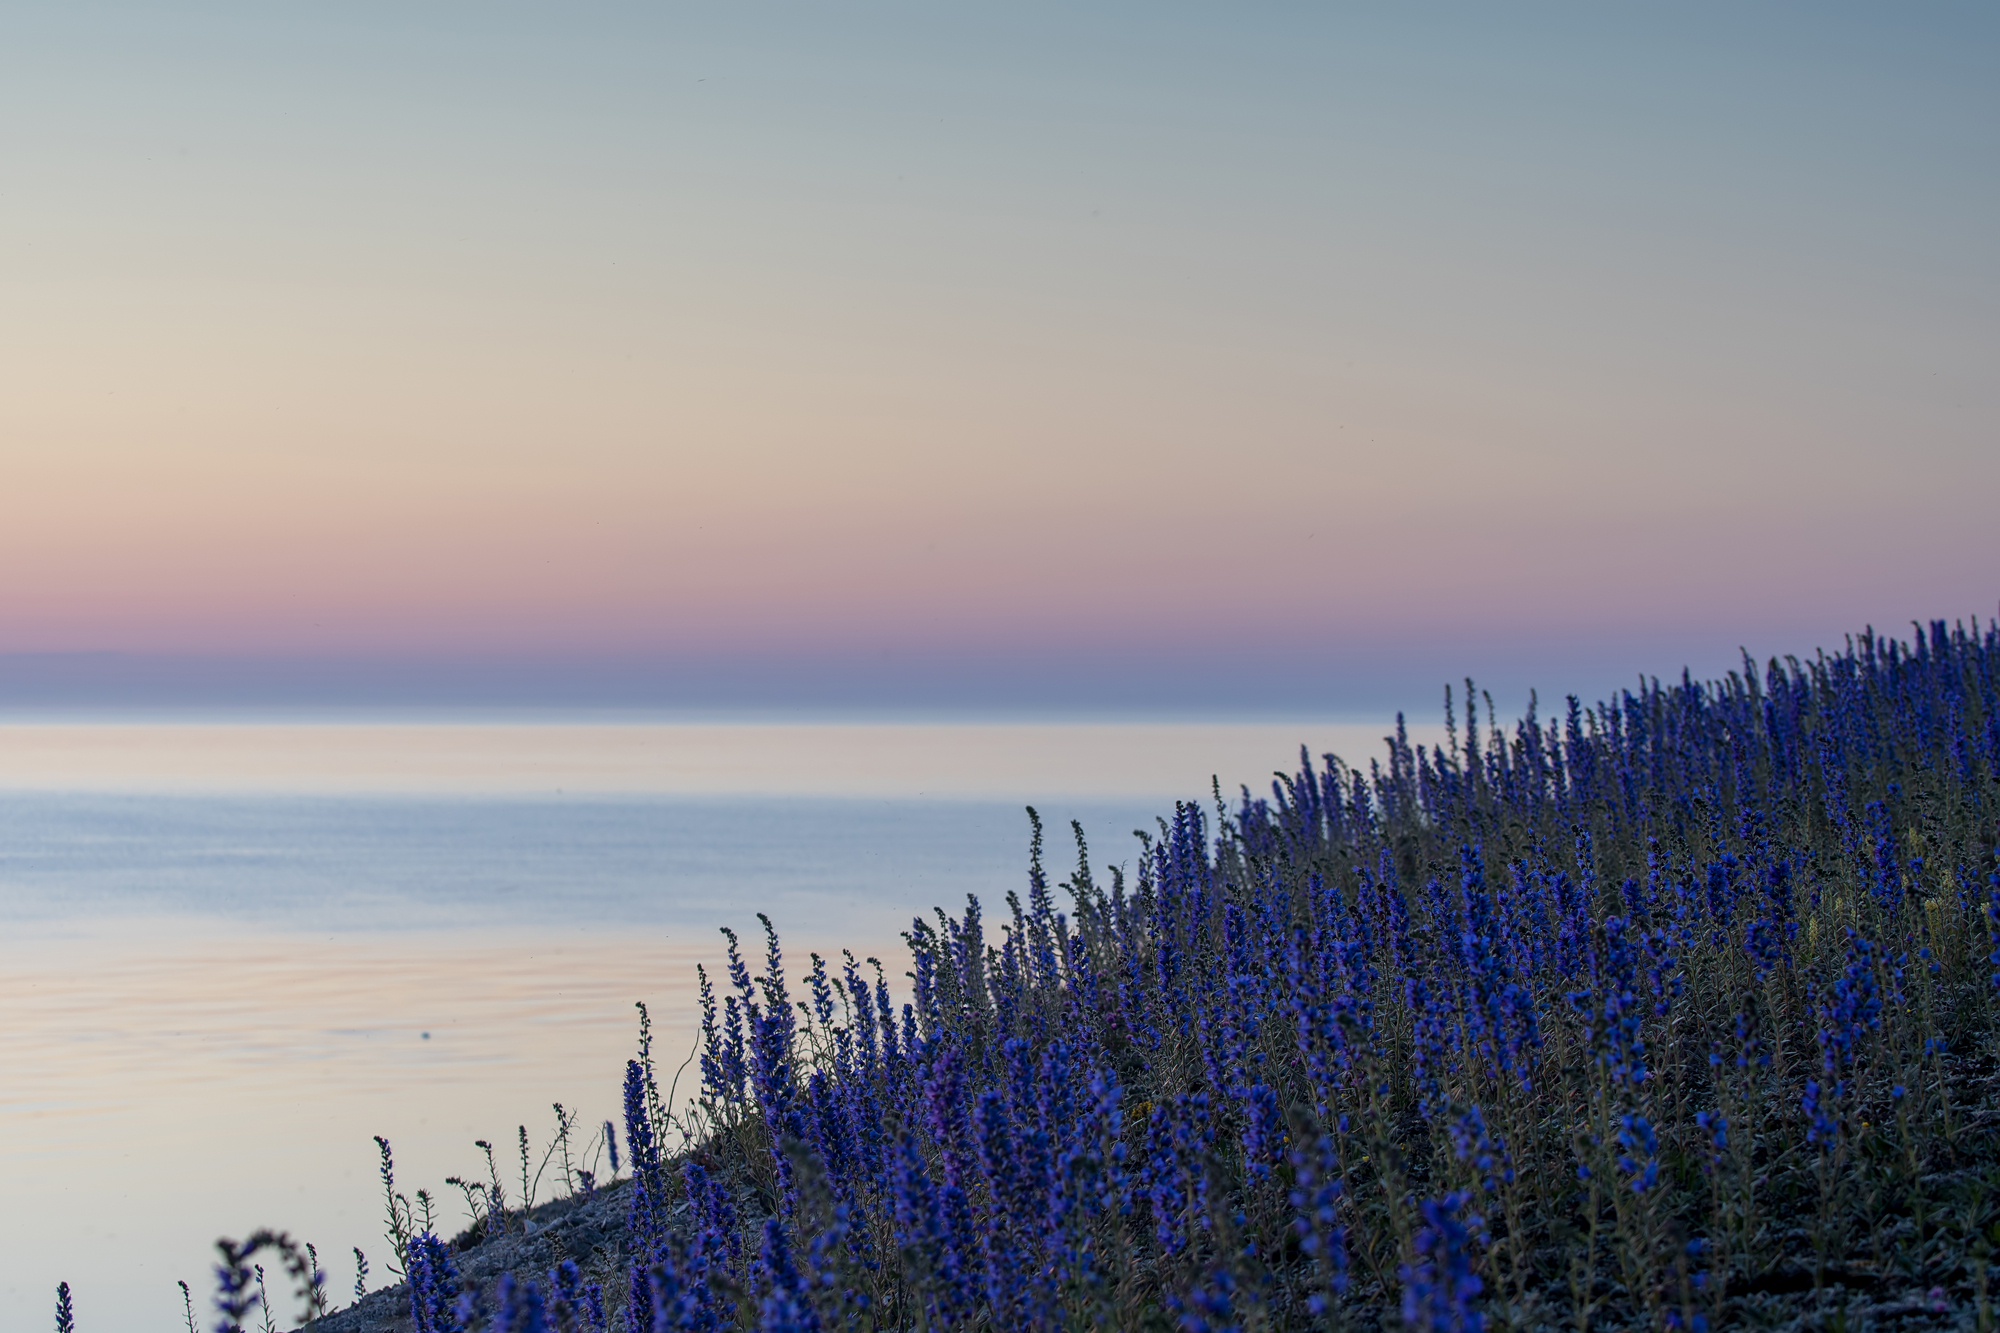 Blooming summer wildflowers Blueweed, Echium vulgare with coastal landscape background on the island of Gotland in Sweden